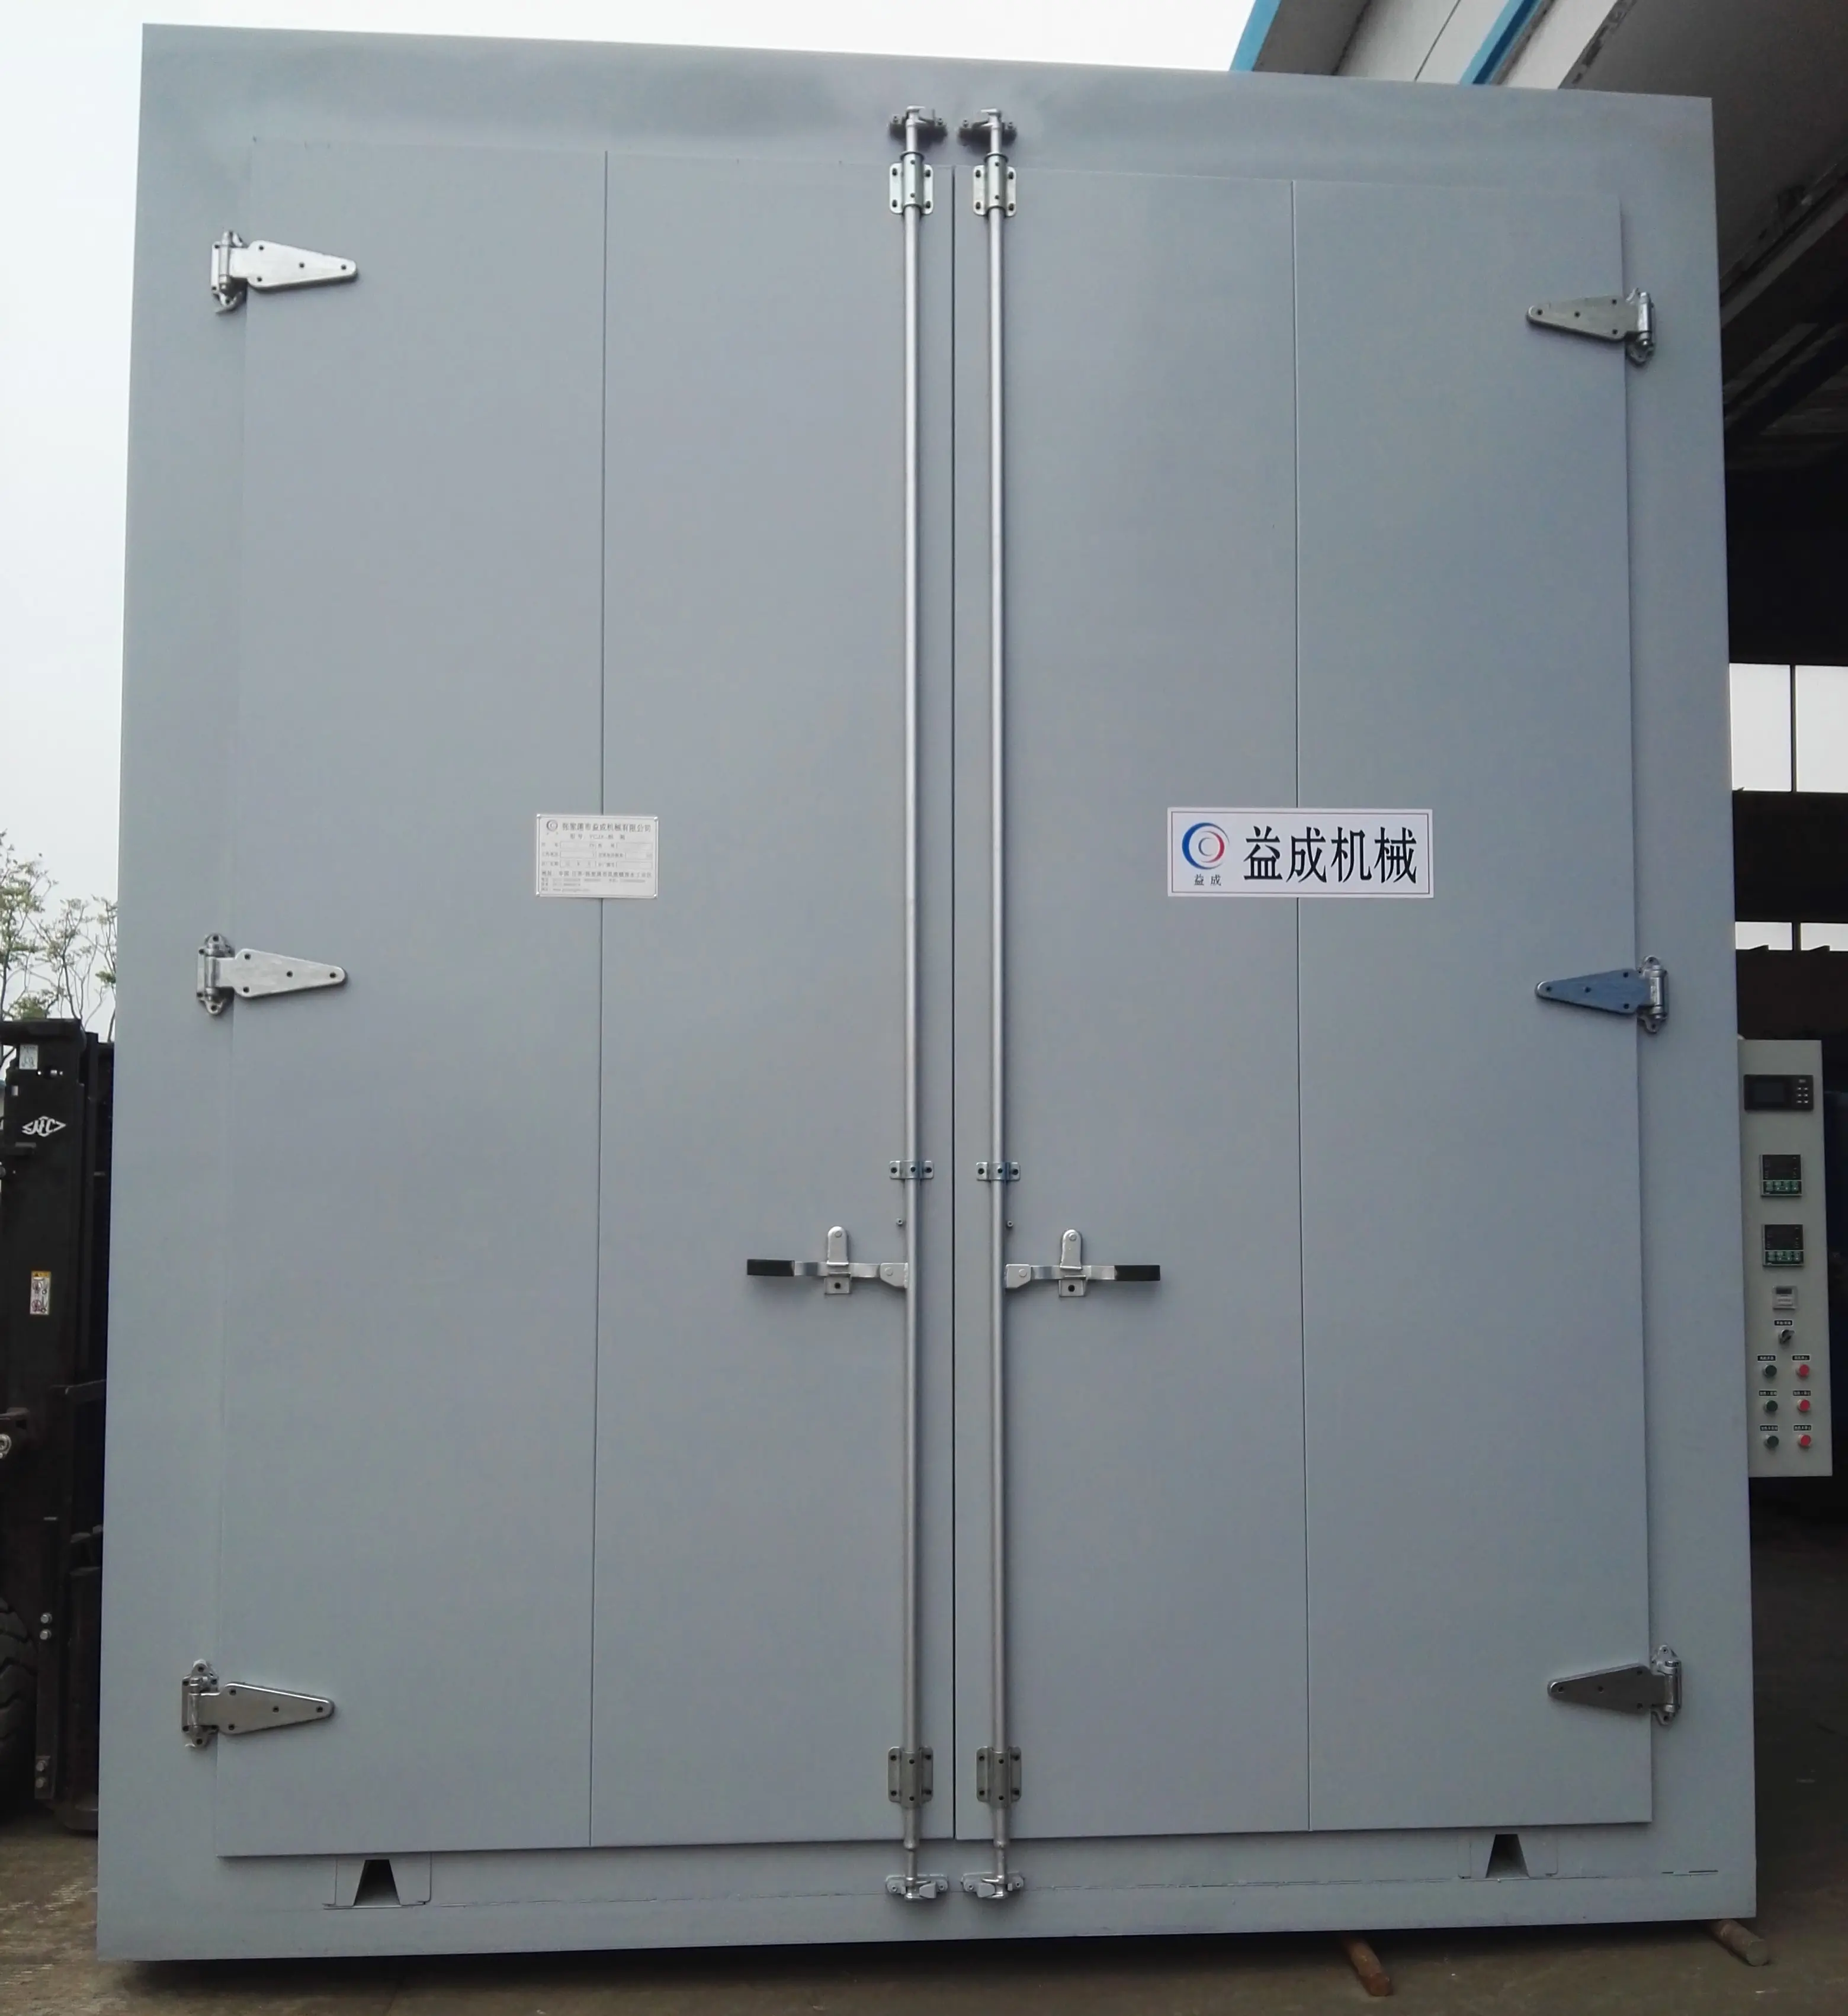 Hot air drying oven / industrial heating oven